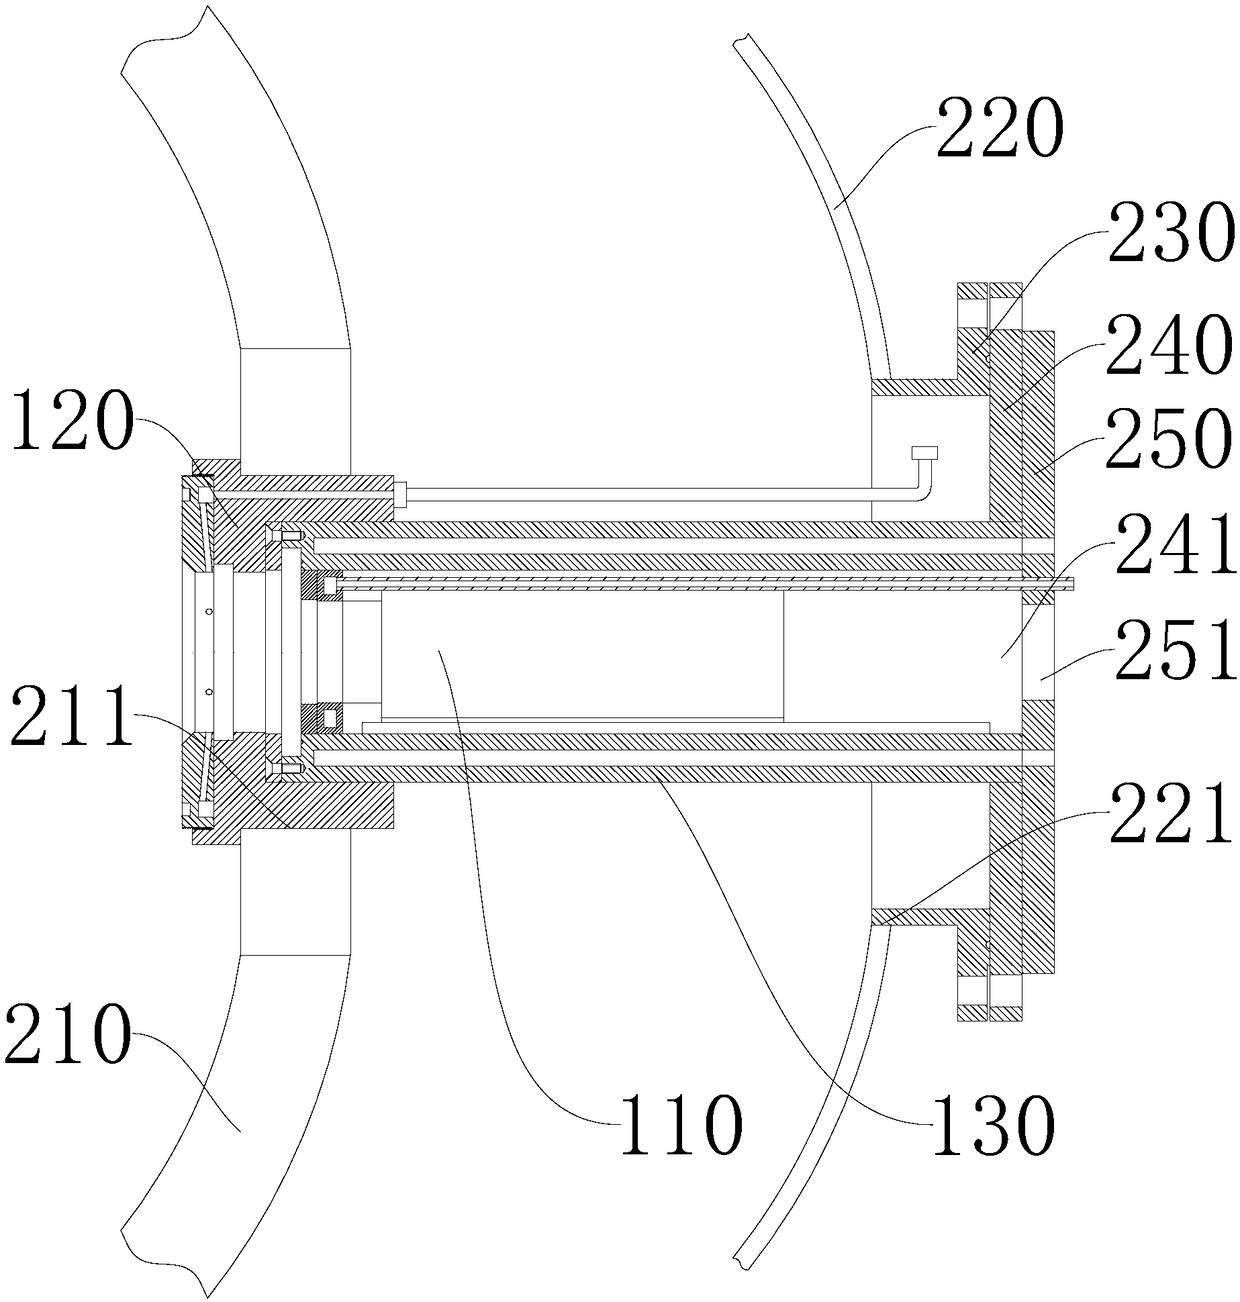 Infrared temperature measuring device and heat treatment equipment